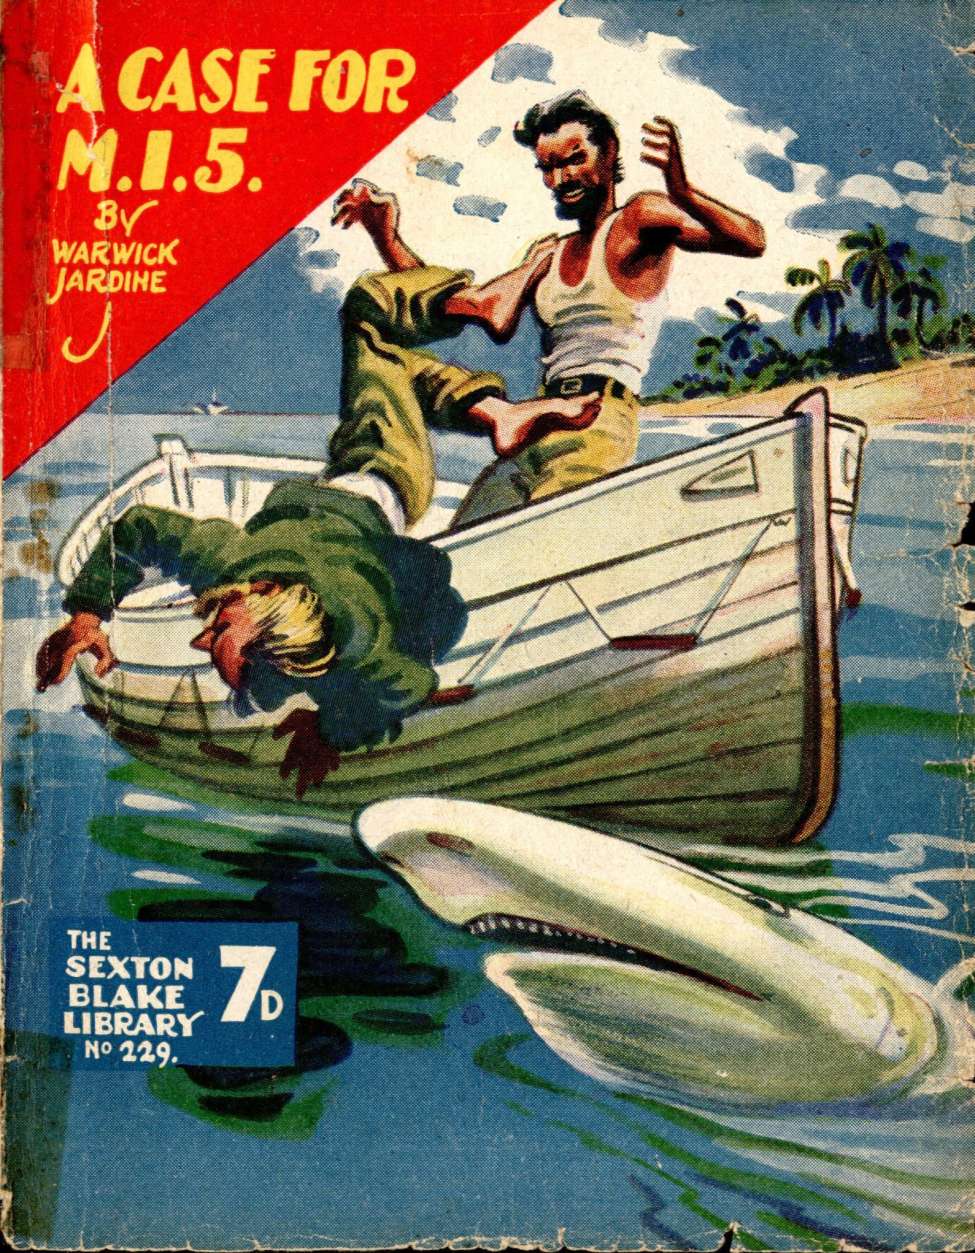 Book Cover For Sexton Blake Library S3 229 - A Case for M.I.5